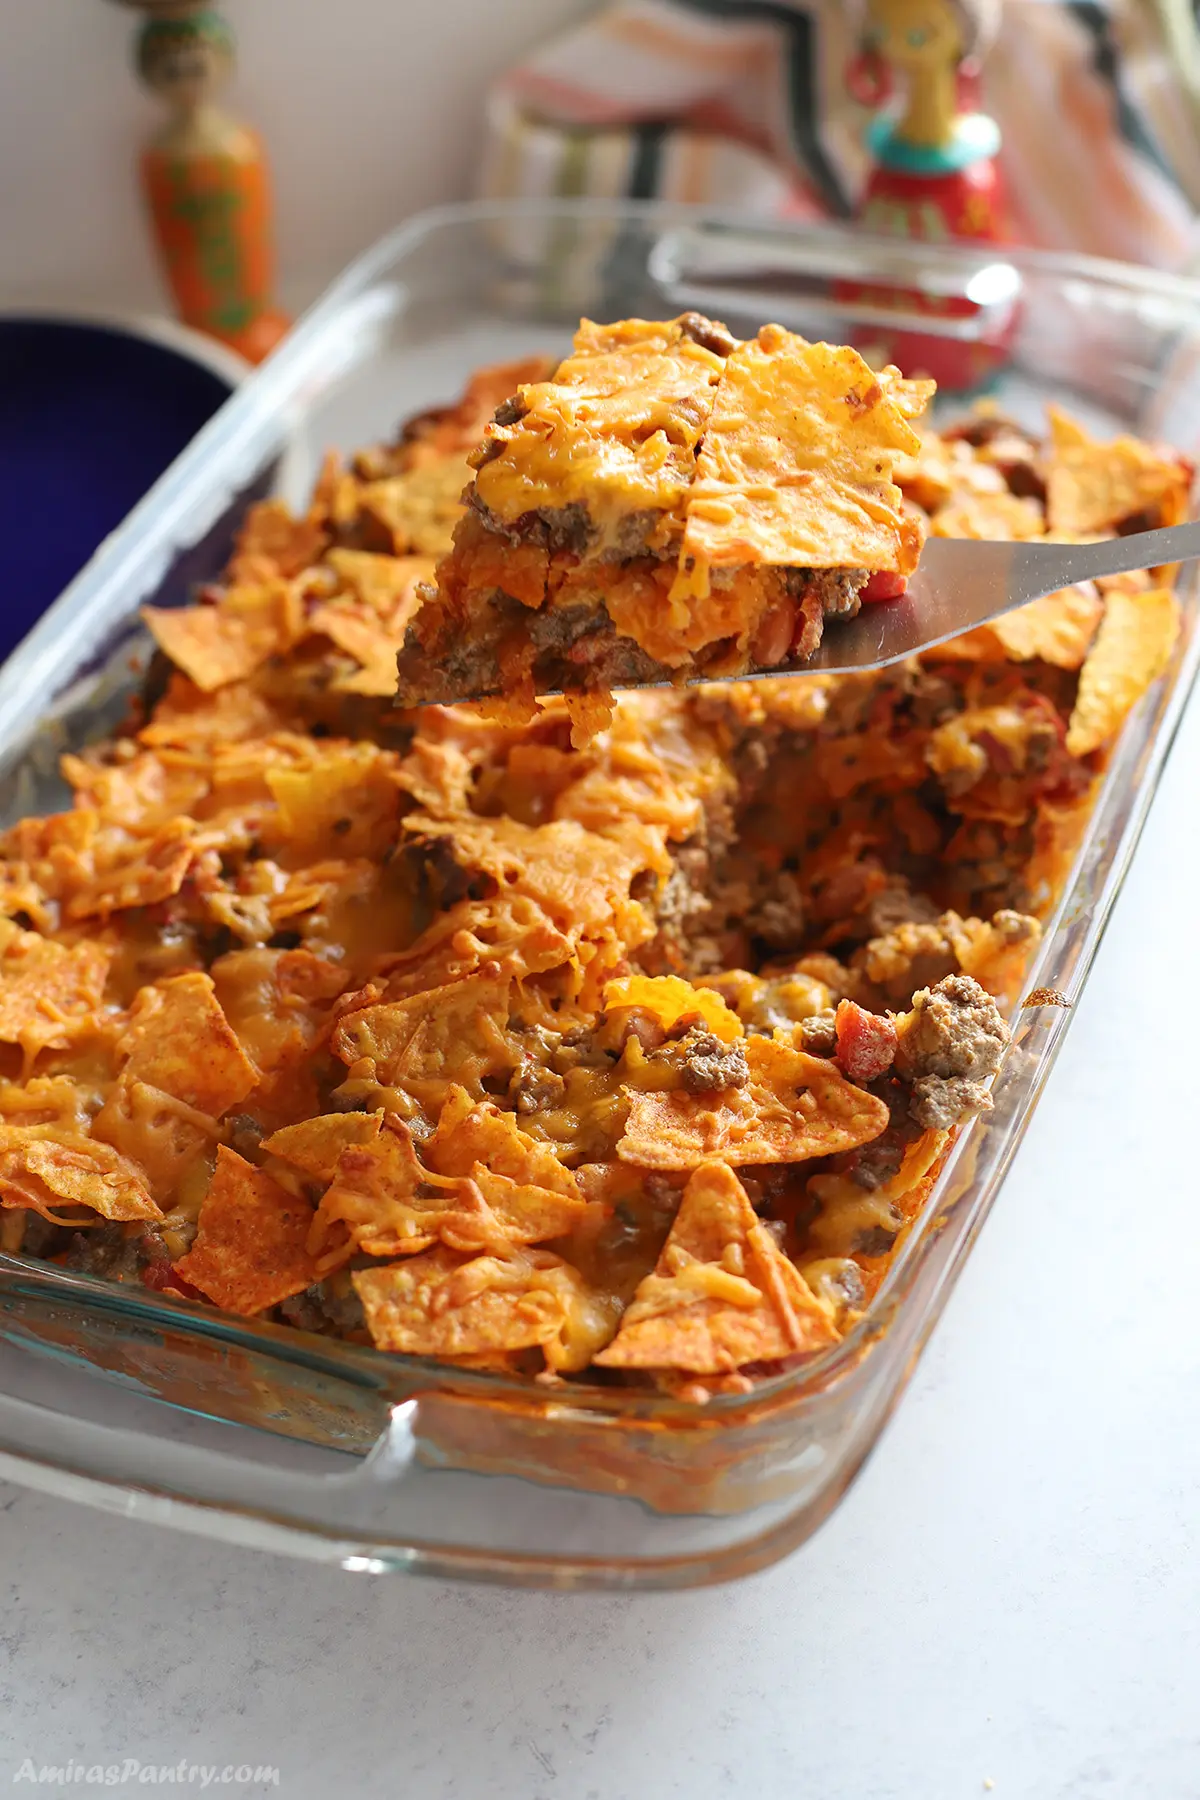 A serving spoon scooping a portion of the doritos casserole.